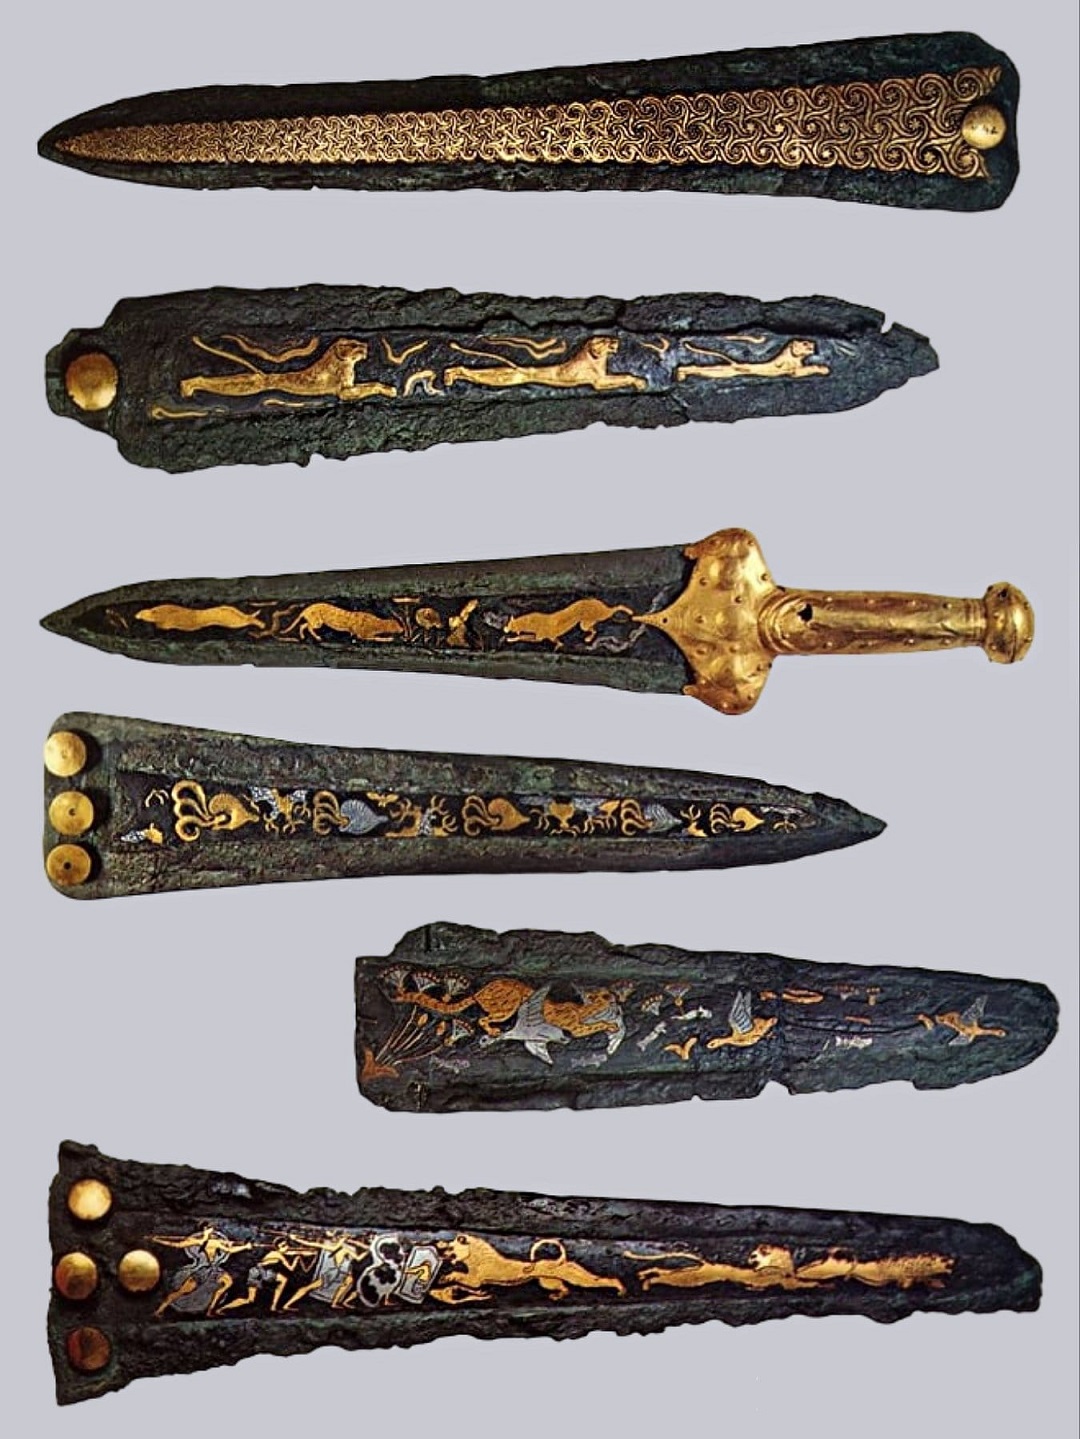 Mycenaean Bronze Daggers, Inlaid With Gold And Silver. 16th Century BC